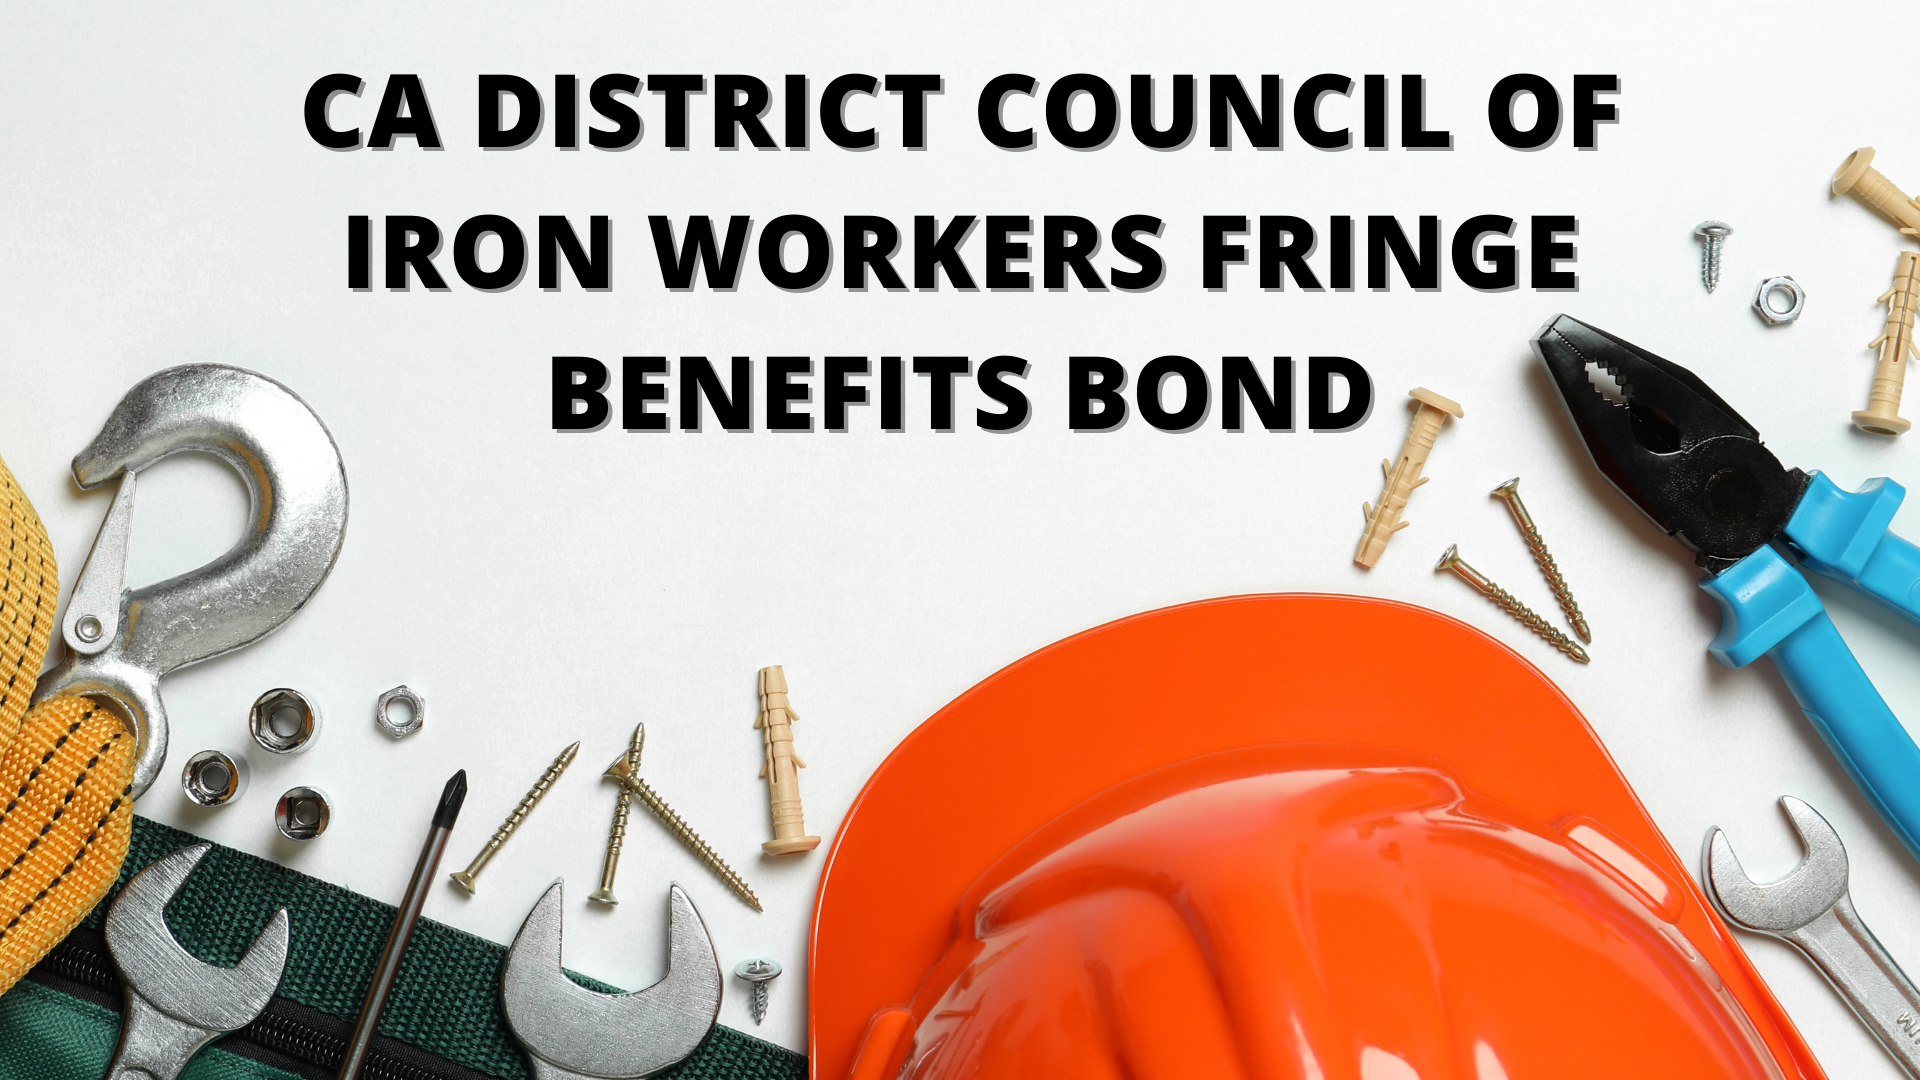 CA District Council of Iron Workers Fringe Benefits Bond